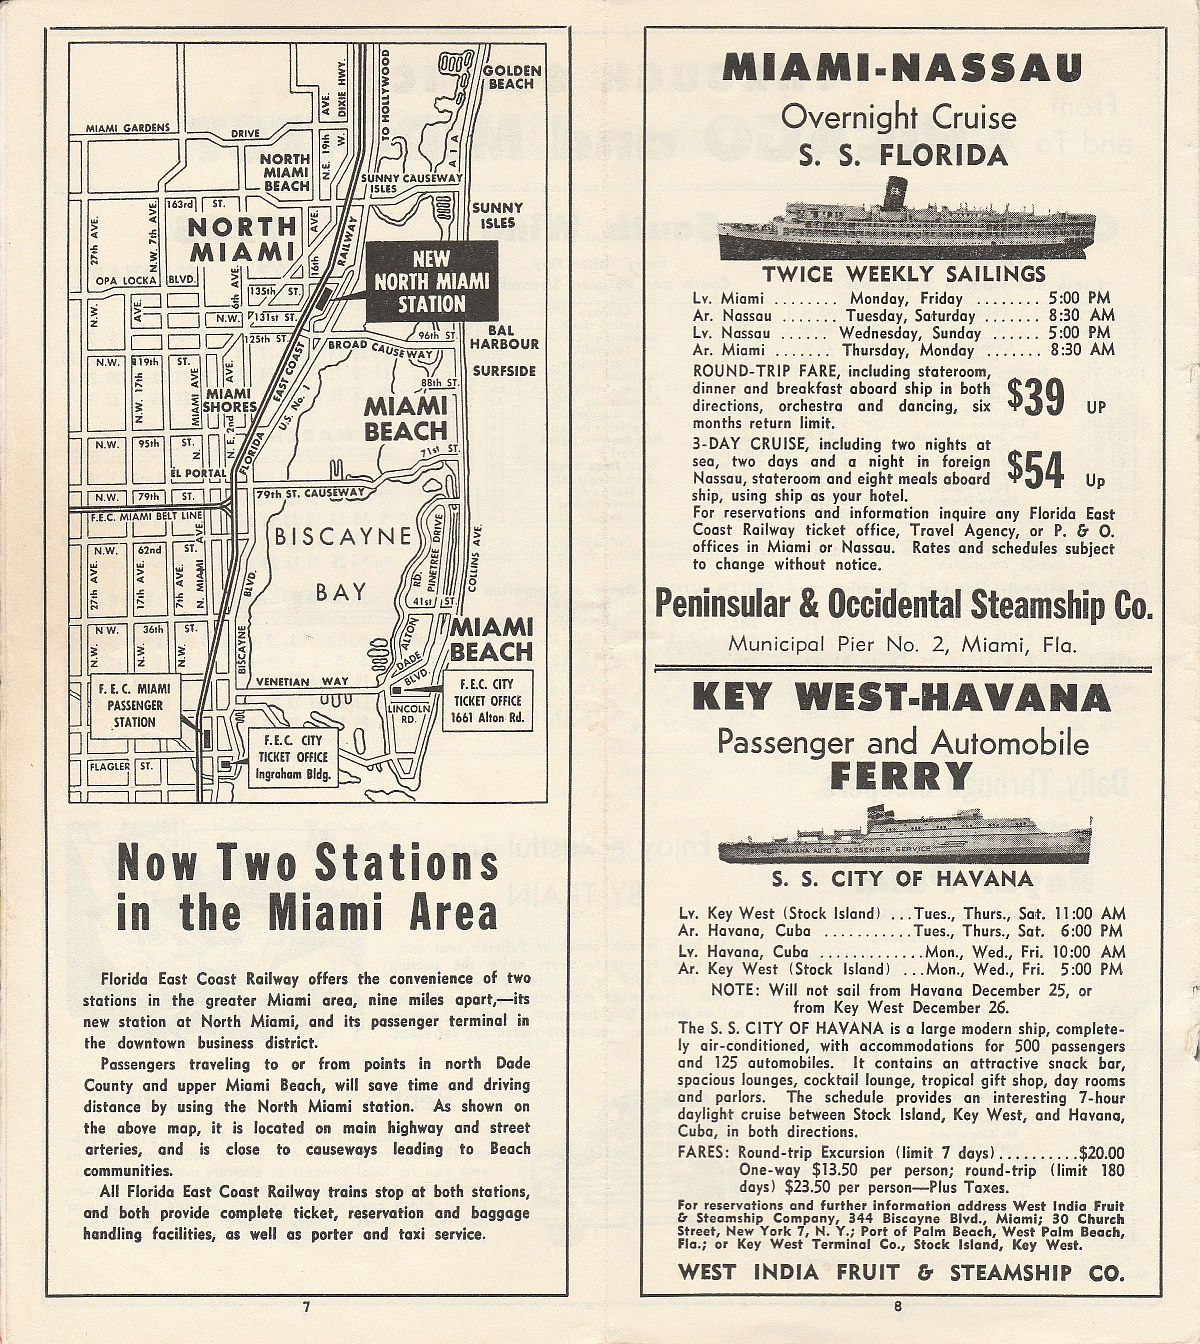 Florida East Coast Railway Dec. 12, 1957 timetable Pg. 7-8: New North Miami station, Miami - Nassau cruises & Key West - Havana ferry Now two F.E.C. stations in the Miami area; ss Florida Miami - Nassau overnight cruise; ss City of Havana Key West - Havana passenger and automobile ferry